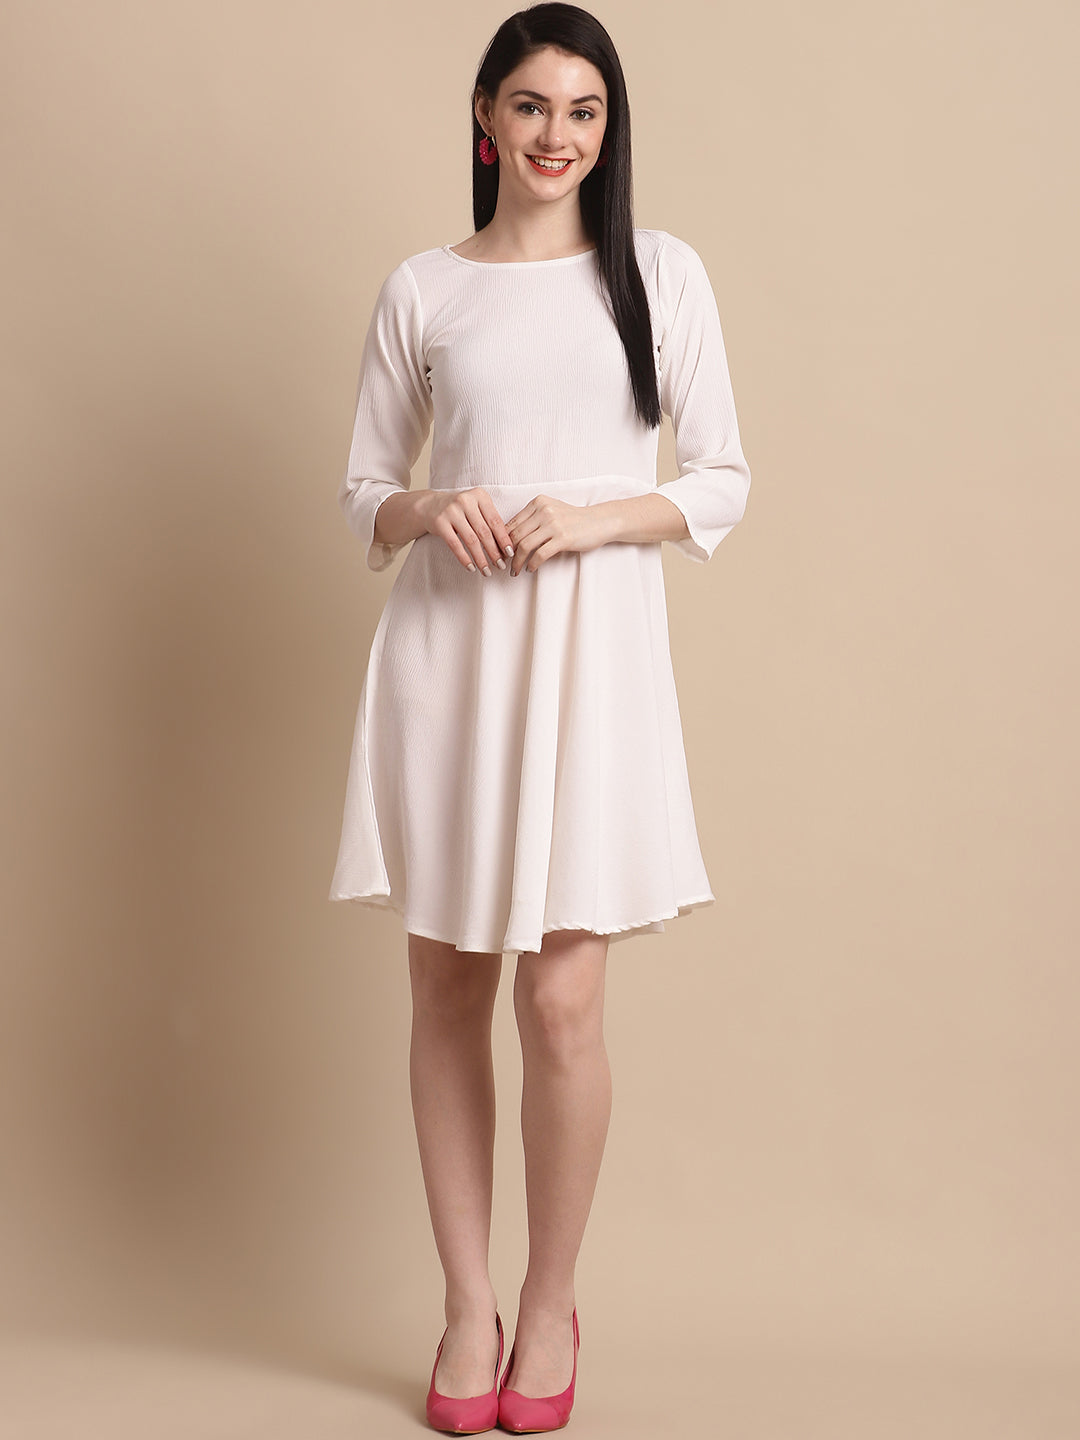 Women White Solid  A-Line Dress